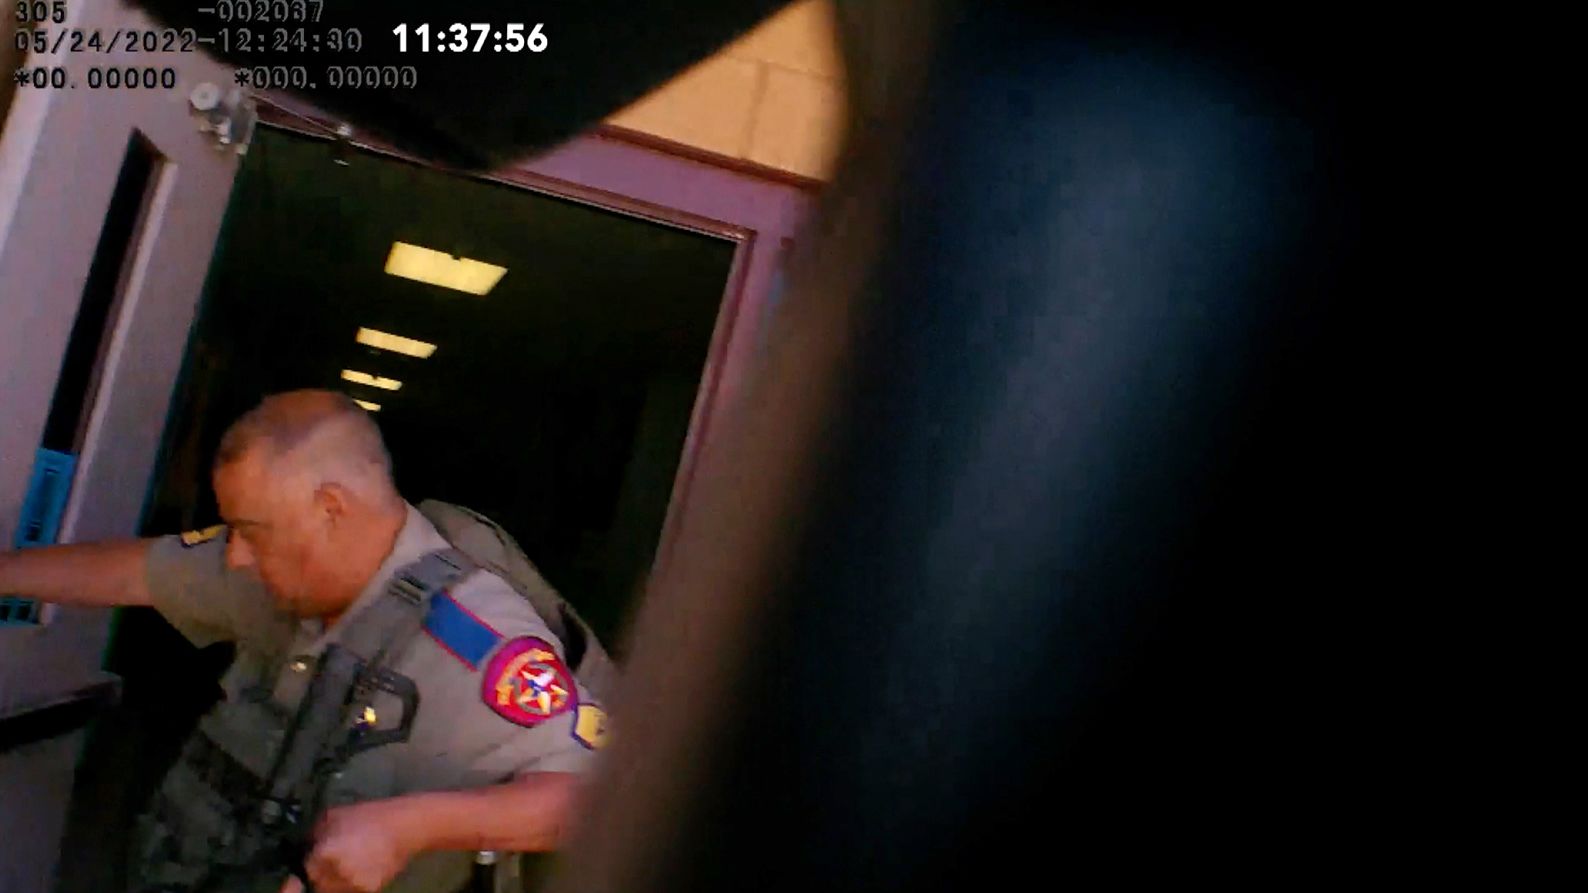 Body camera video shows a DPS trooper was already at the west entrance of the school building nearly 5 minutes earlier than previously known.